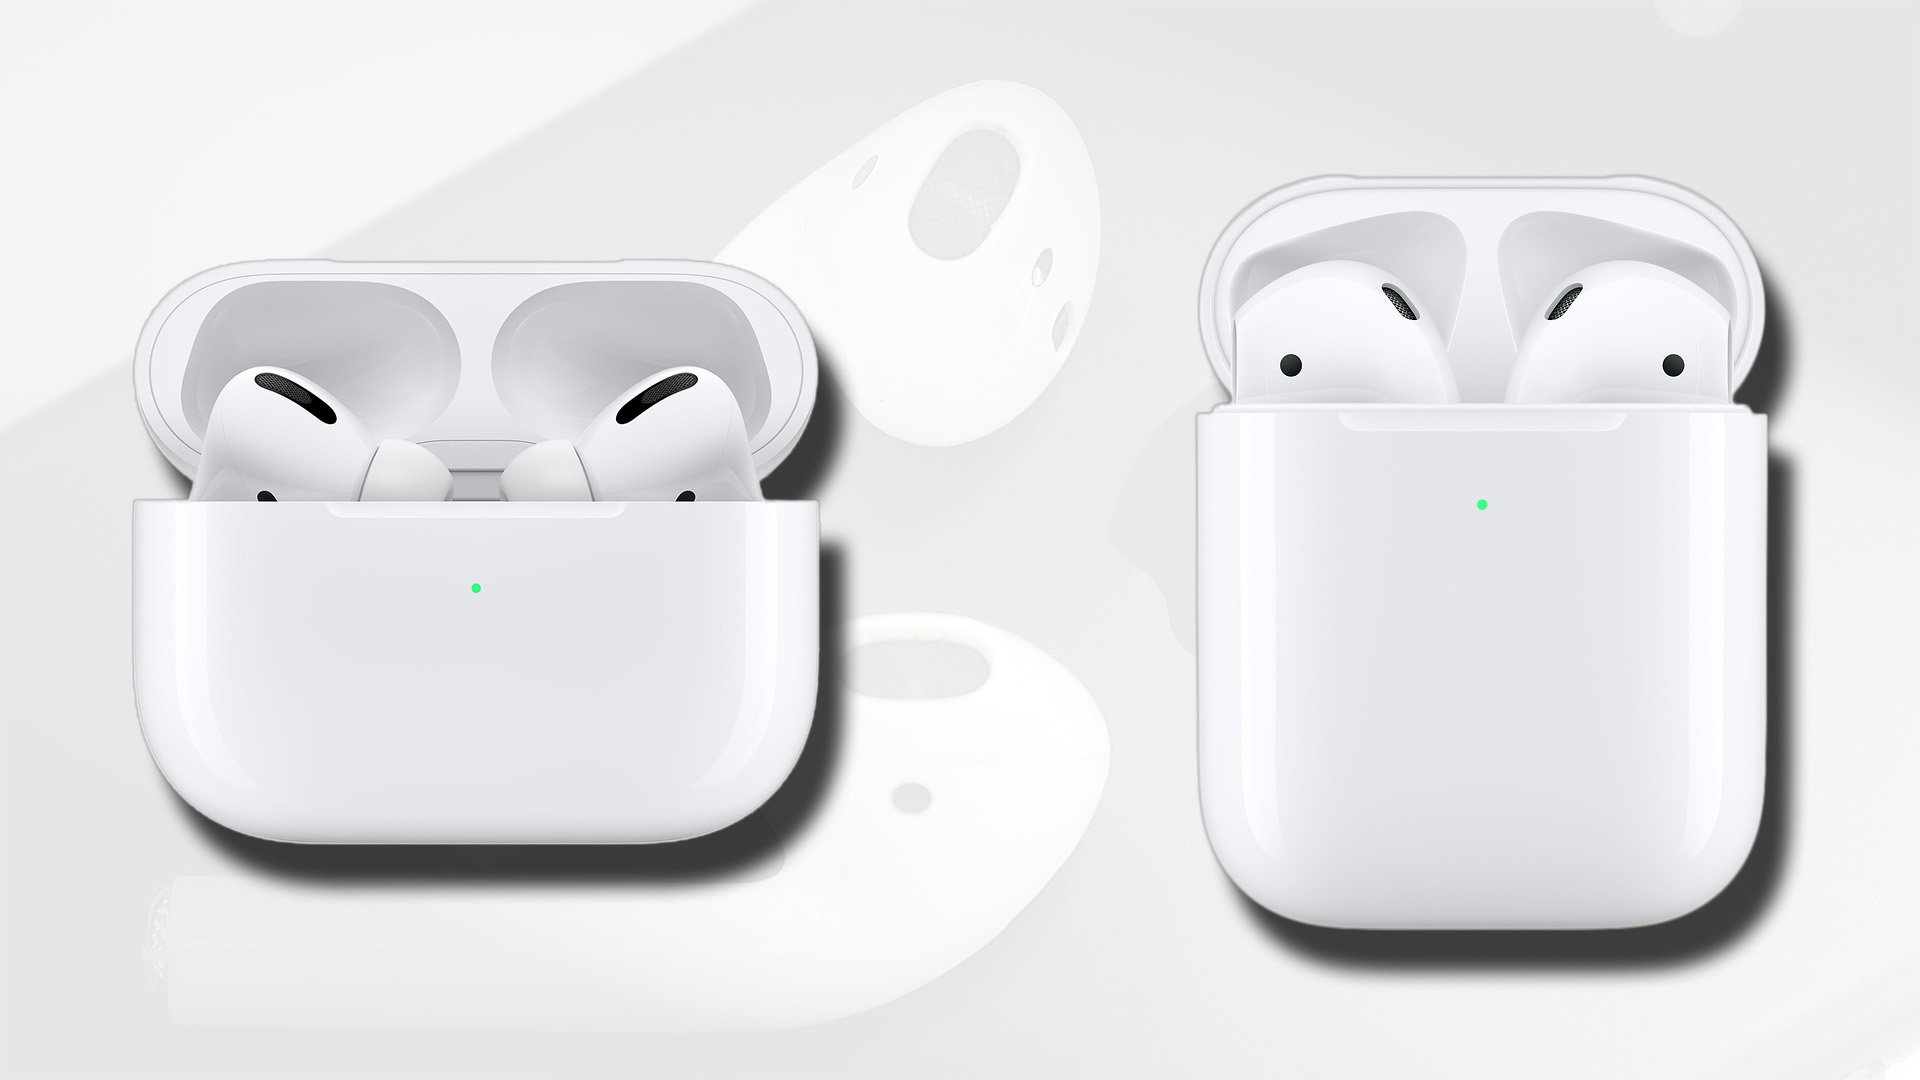 AirPods Pro vs AirPods: which fit your ears better?